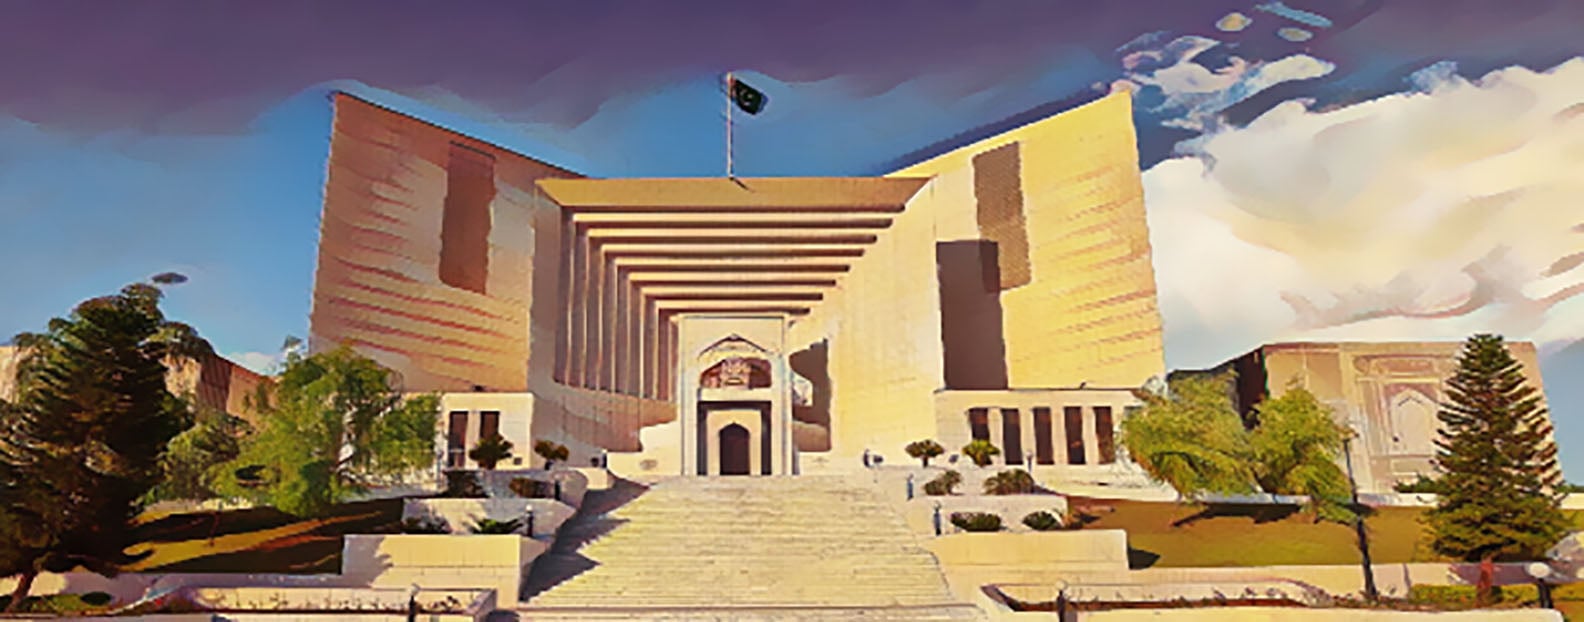 The Supreme Courts building can be seen in this illustration. — Supreme Courts website